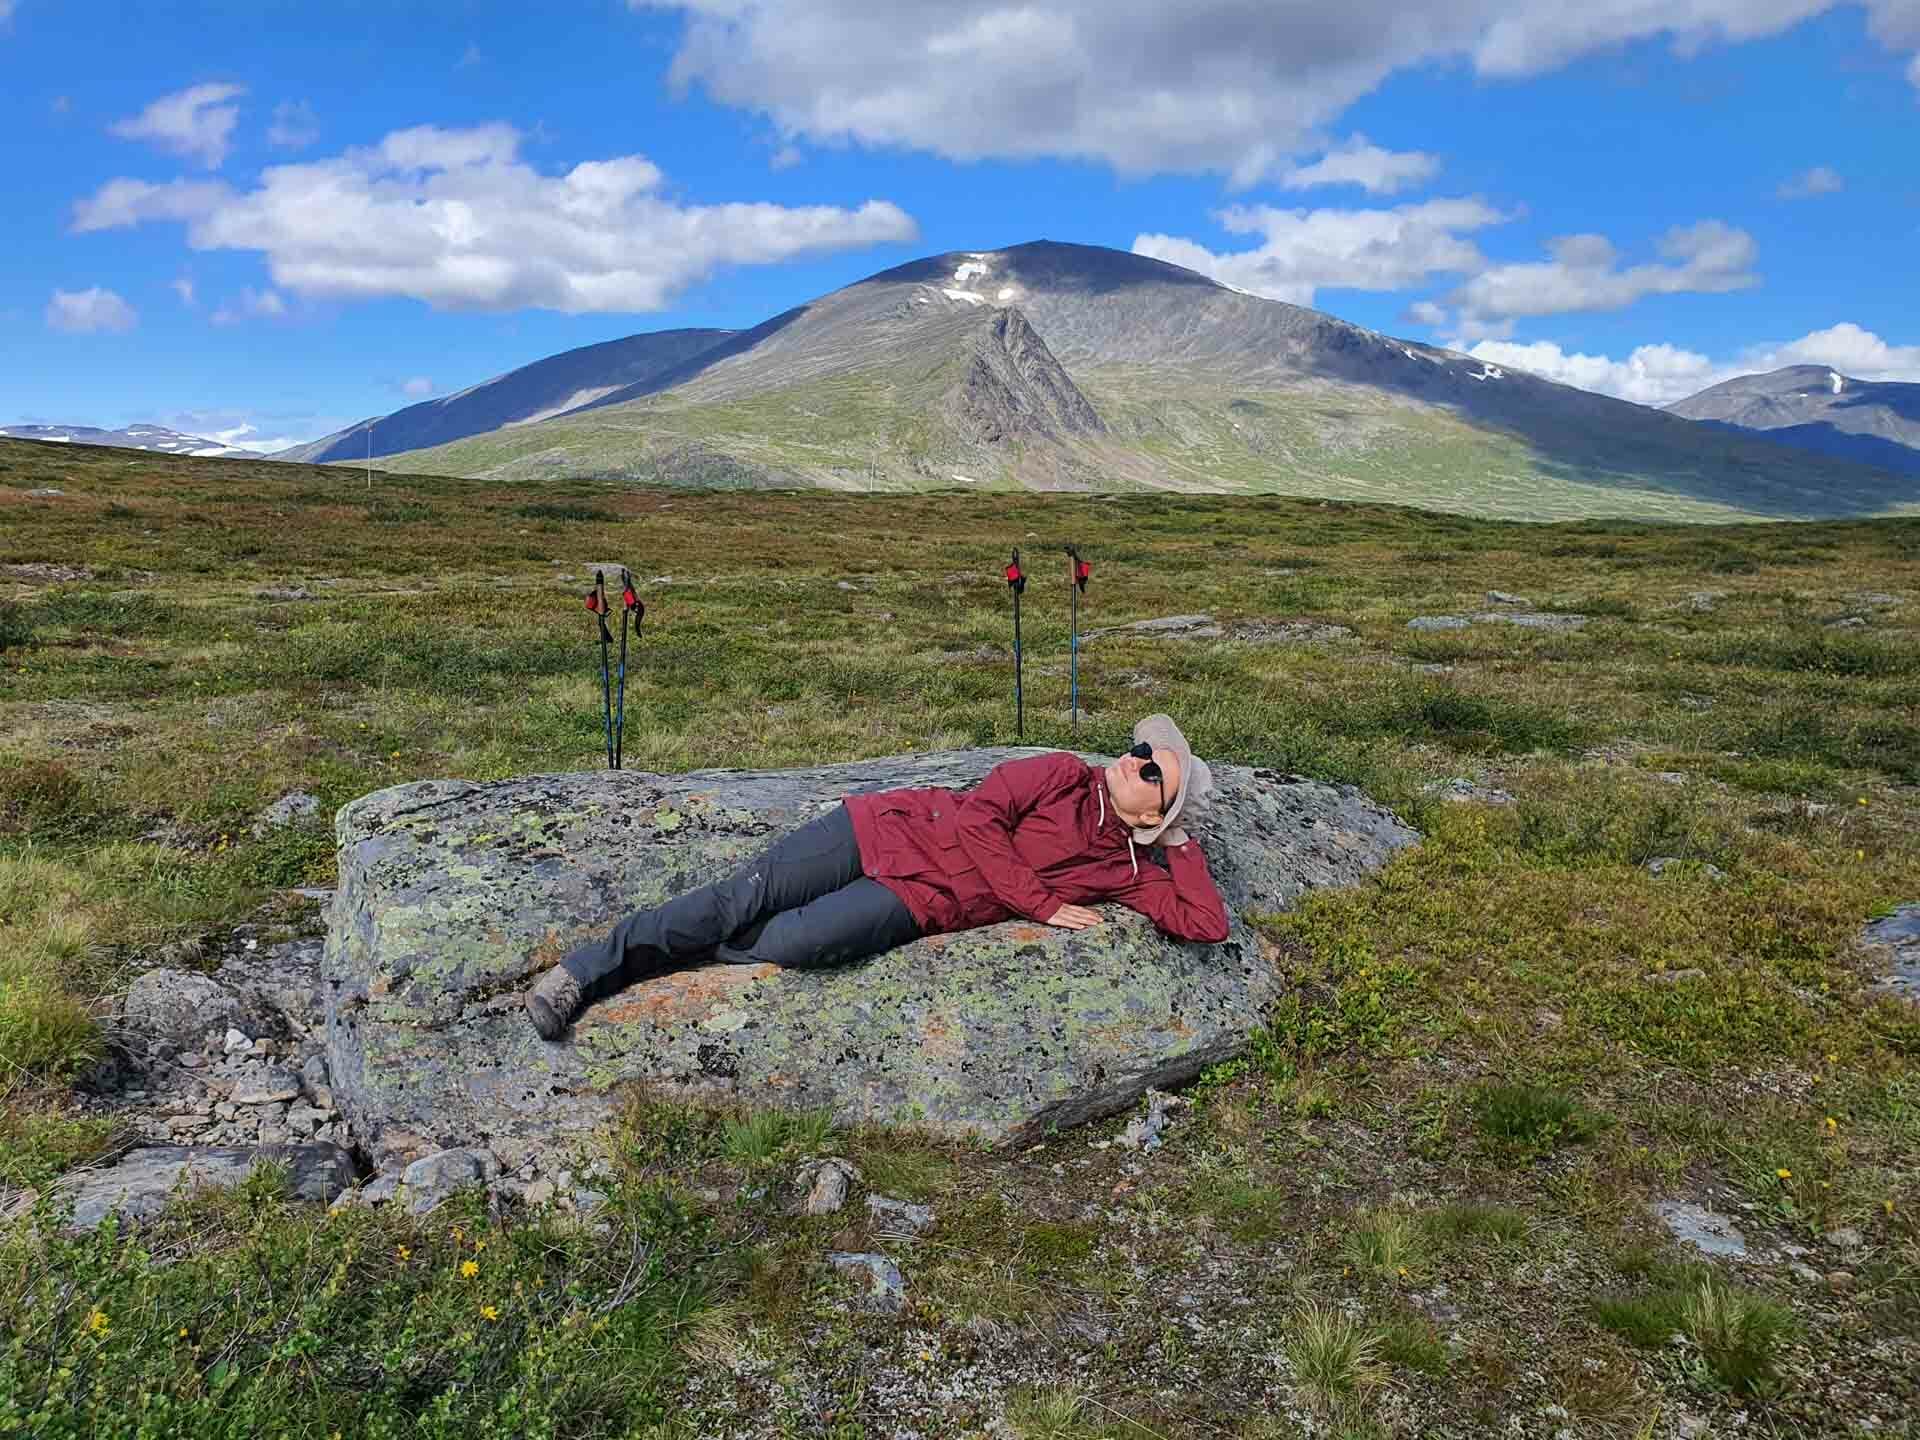 Kungsleden Overview: A Guide to Hiking the King’s Way (Sweden), saphira Schroers